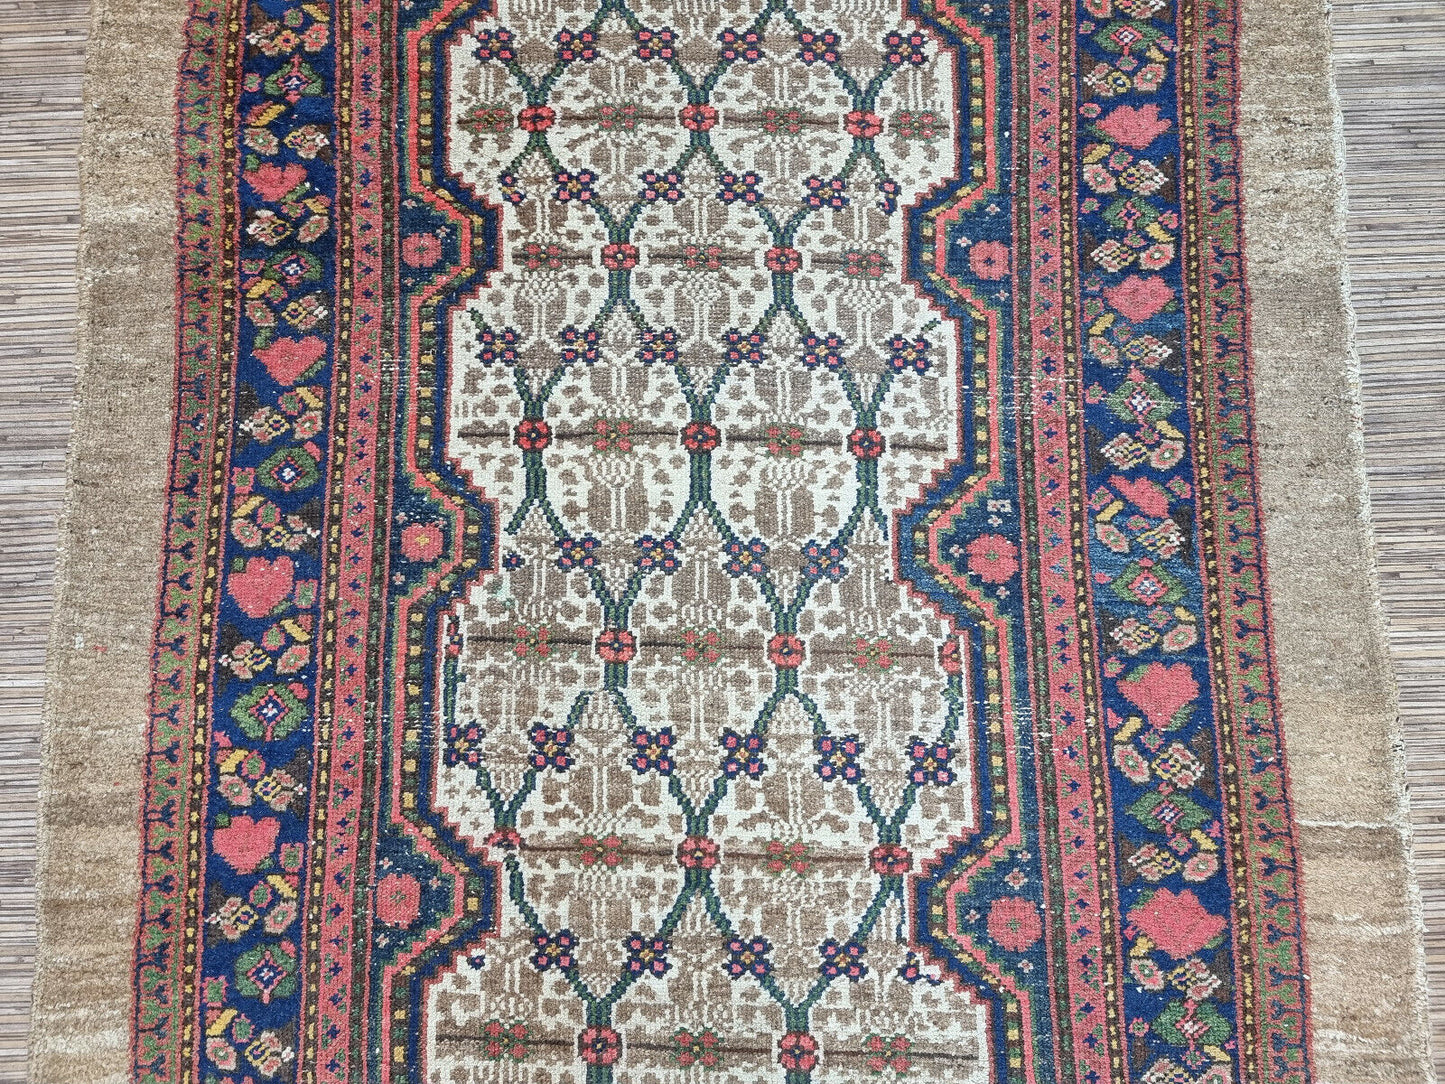 Close-up of symmetrical balance on Handmade Antique Persian Camel Hair Runner Rug - Detailed view emphasizing the symmetrical balance achieved by the geometric shapes in the central field.